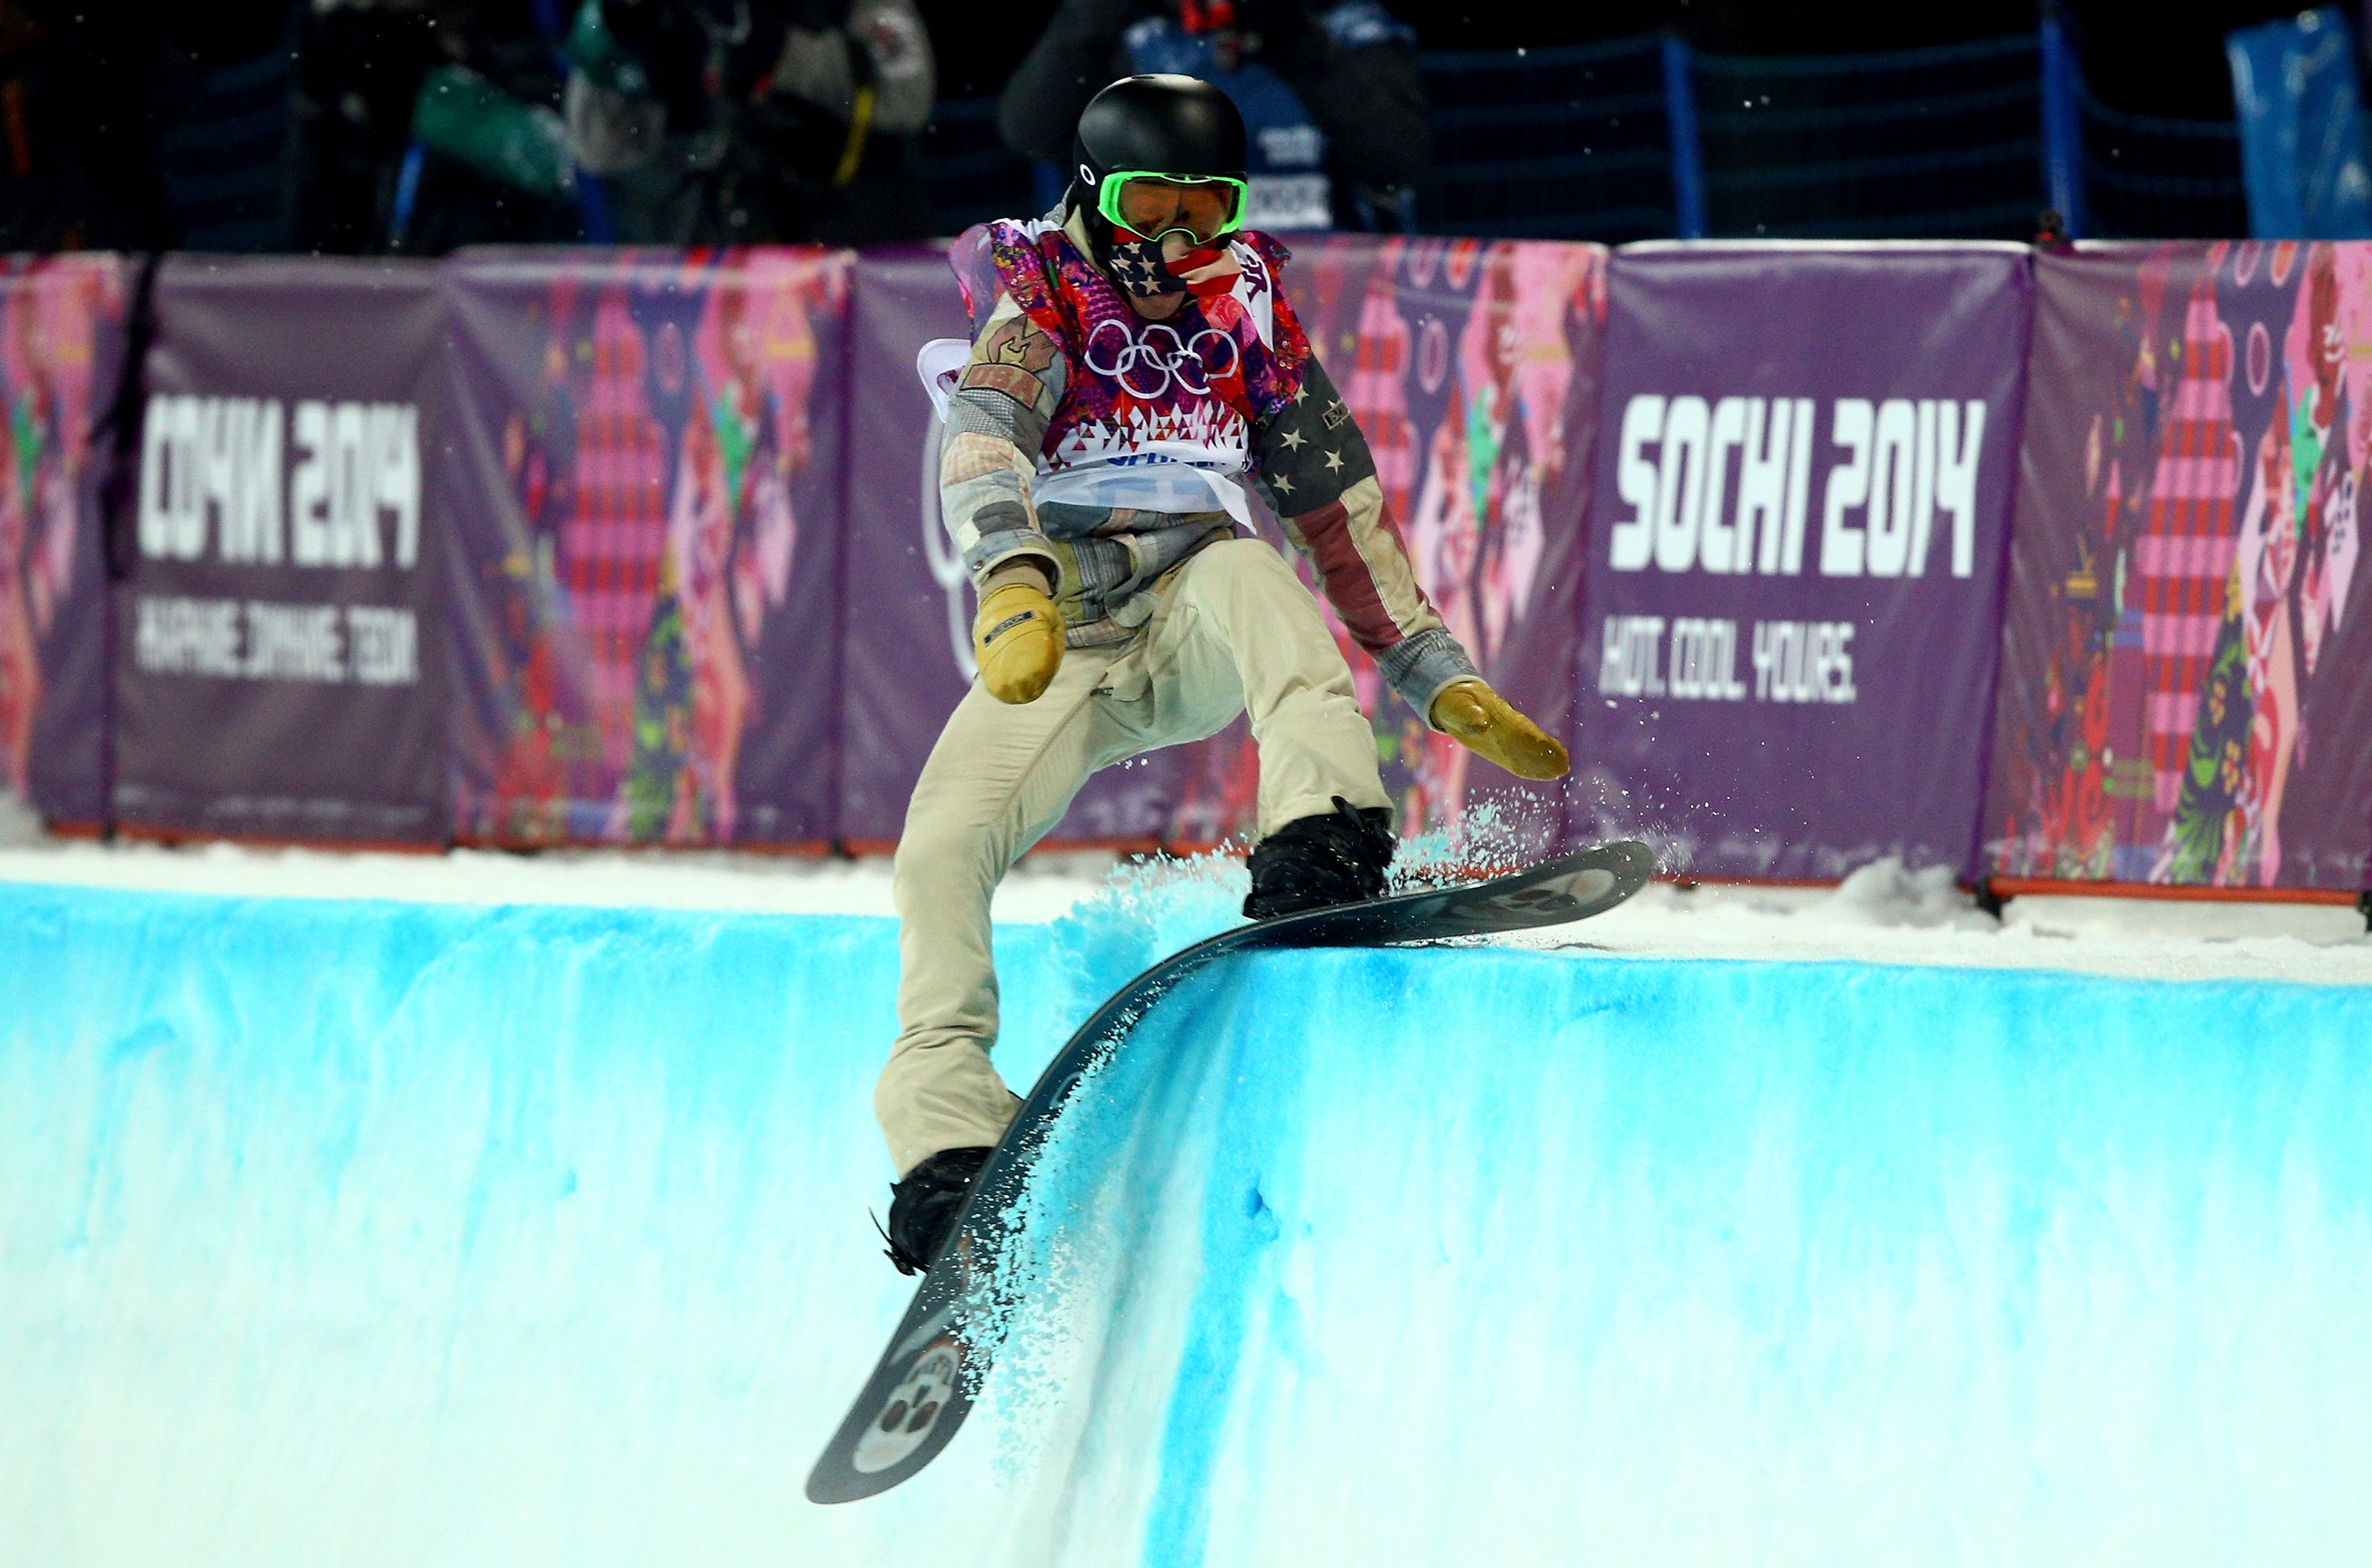 Shaun White is retiring. Here's a look at his golden snowboarding